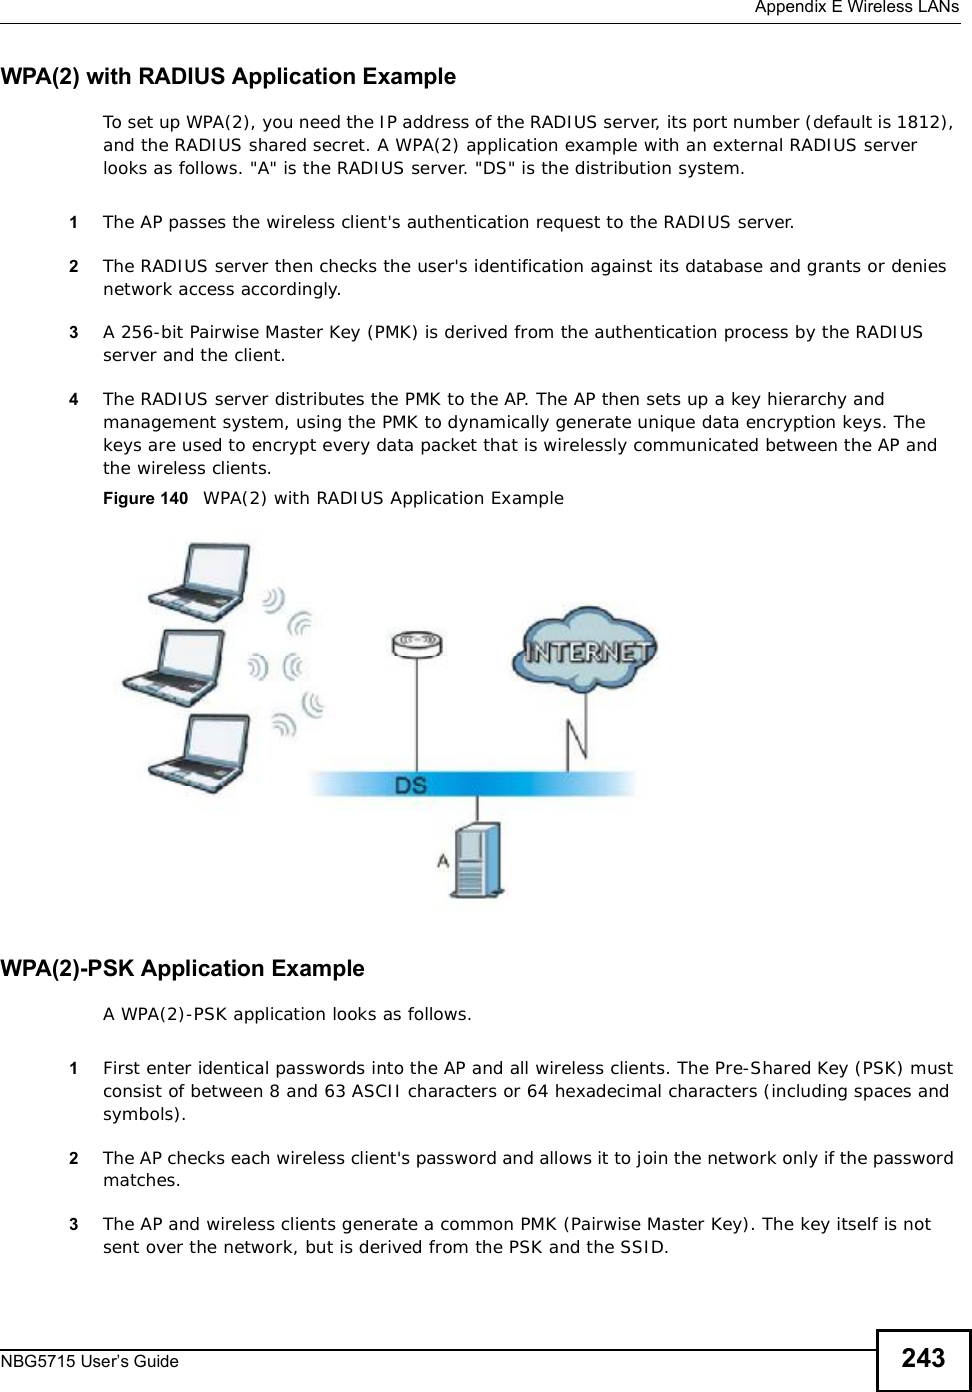  Appendix EWireless LANsNBG5715 User’s Guide 243WPA(2) with RADIUS Application ExampleTo set up WPA(2), you need the IP address of the RADIUS server, its port number (default is 1812), and the RADIUS shared secret. A WPA(2) application example with an external RADIUS server looks as follows. &quot;A&quot; is the RADIUS server. &quot;DS&quot; is the distribution system.1The AP passes the wireless client&apos;s authentication request to the RADIUS server.2The RADIUS server then checks the user&apos;s identification against its database and grants or denies network access accordingly.3A 256-bit Pairwise Master Key (PMK) is derived from the authentication process by the RADIUS server and the client.4The RADIUS server distributes the PMK to the AP. The AP then sets up a key hierarchy and management system, using the PMK to dynamically generate unique data encryption keys. The keys are used to encrypt every data packet that is wirelessly communicated between the AP and the wireless clients.Figure 140   WPA(2) with RADIUS Application ExampleWPA(2)-PSK Application ExampleA WPA(2)-PSK application looks as follows.1First enter identical passwords into the AP and all wireless clients. The Pre-Shared Key (PSK) must consist of between 8 and 63 ASCII characters or 64 hexadecimal characters (including spaces and symbols).2The AP checks each wireless client&apos;s password and allows it to join the network only if the password matches.3The AP and wireless clients generate a common PMK (Pairwise Master Key). The key itself is not sent over the network, but is derived from the PSK and the SSID. 